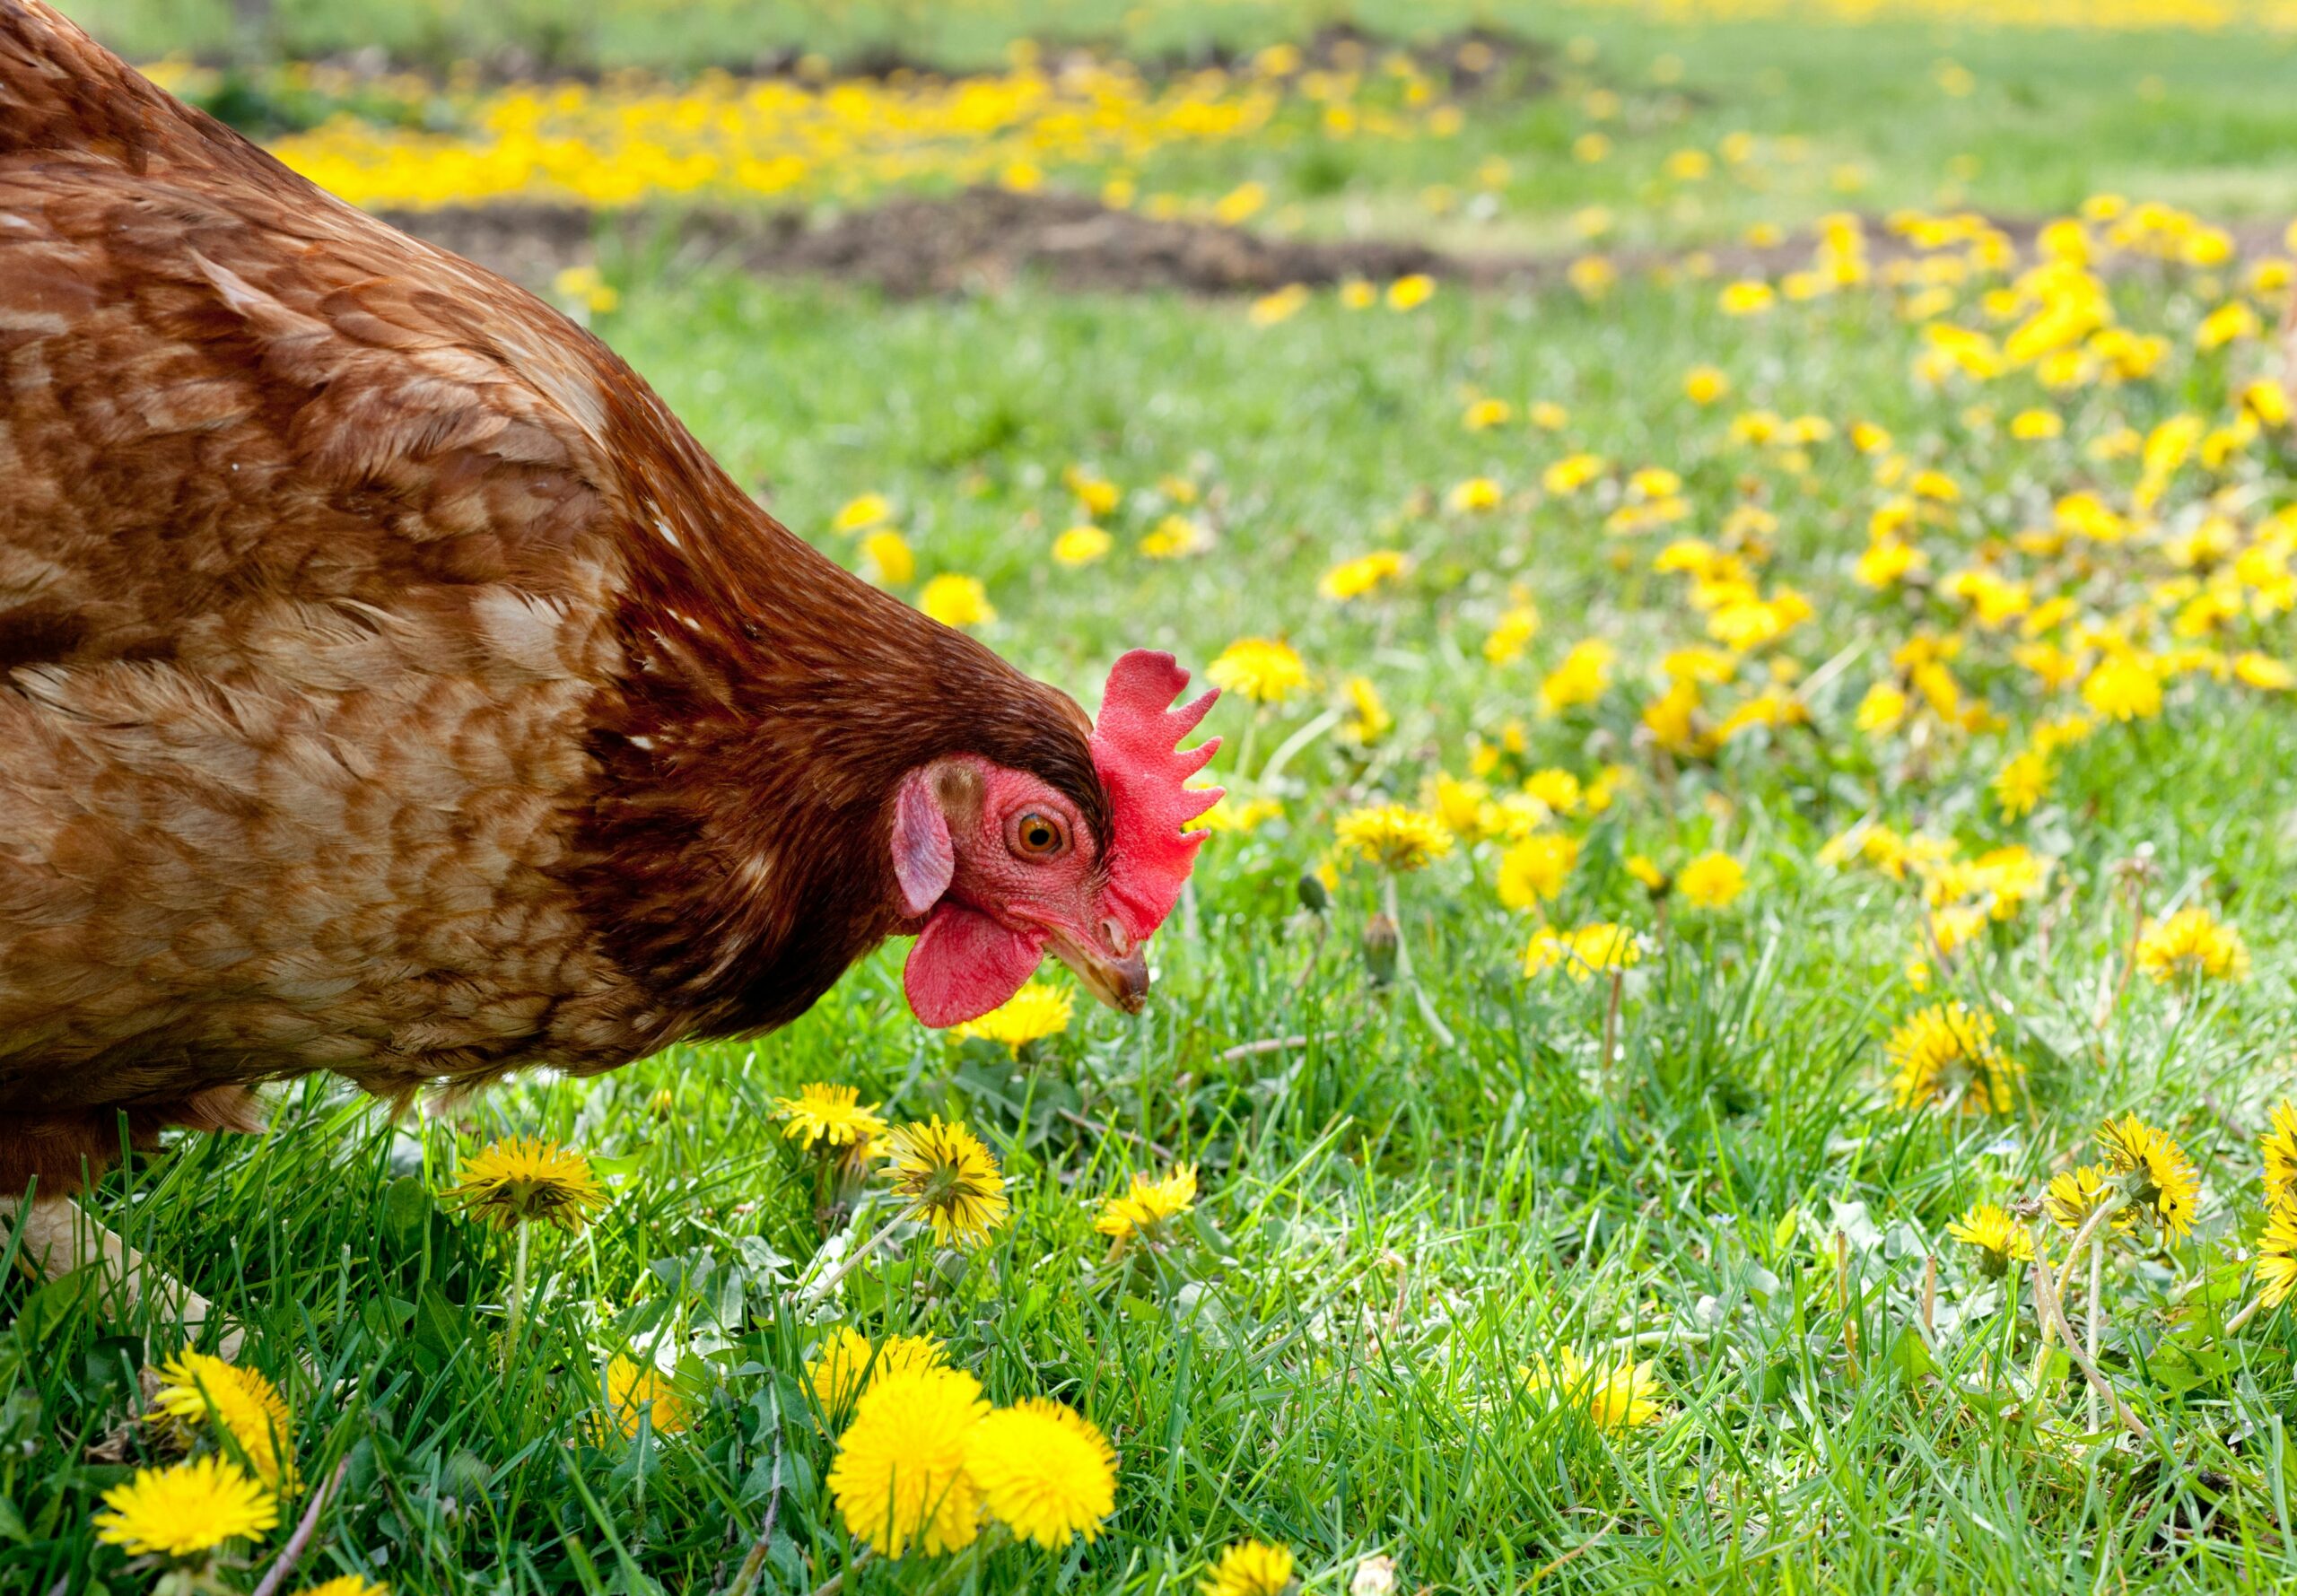 Chicken in a weed covered field